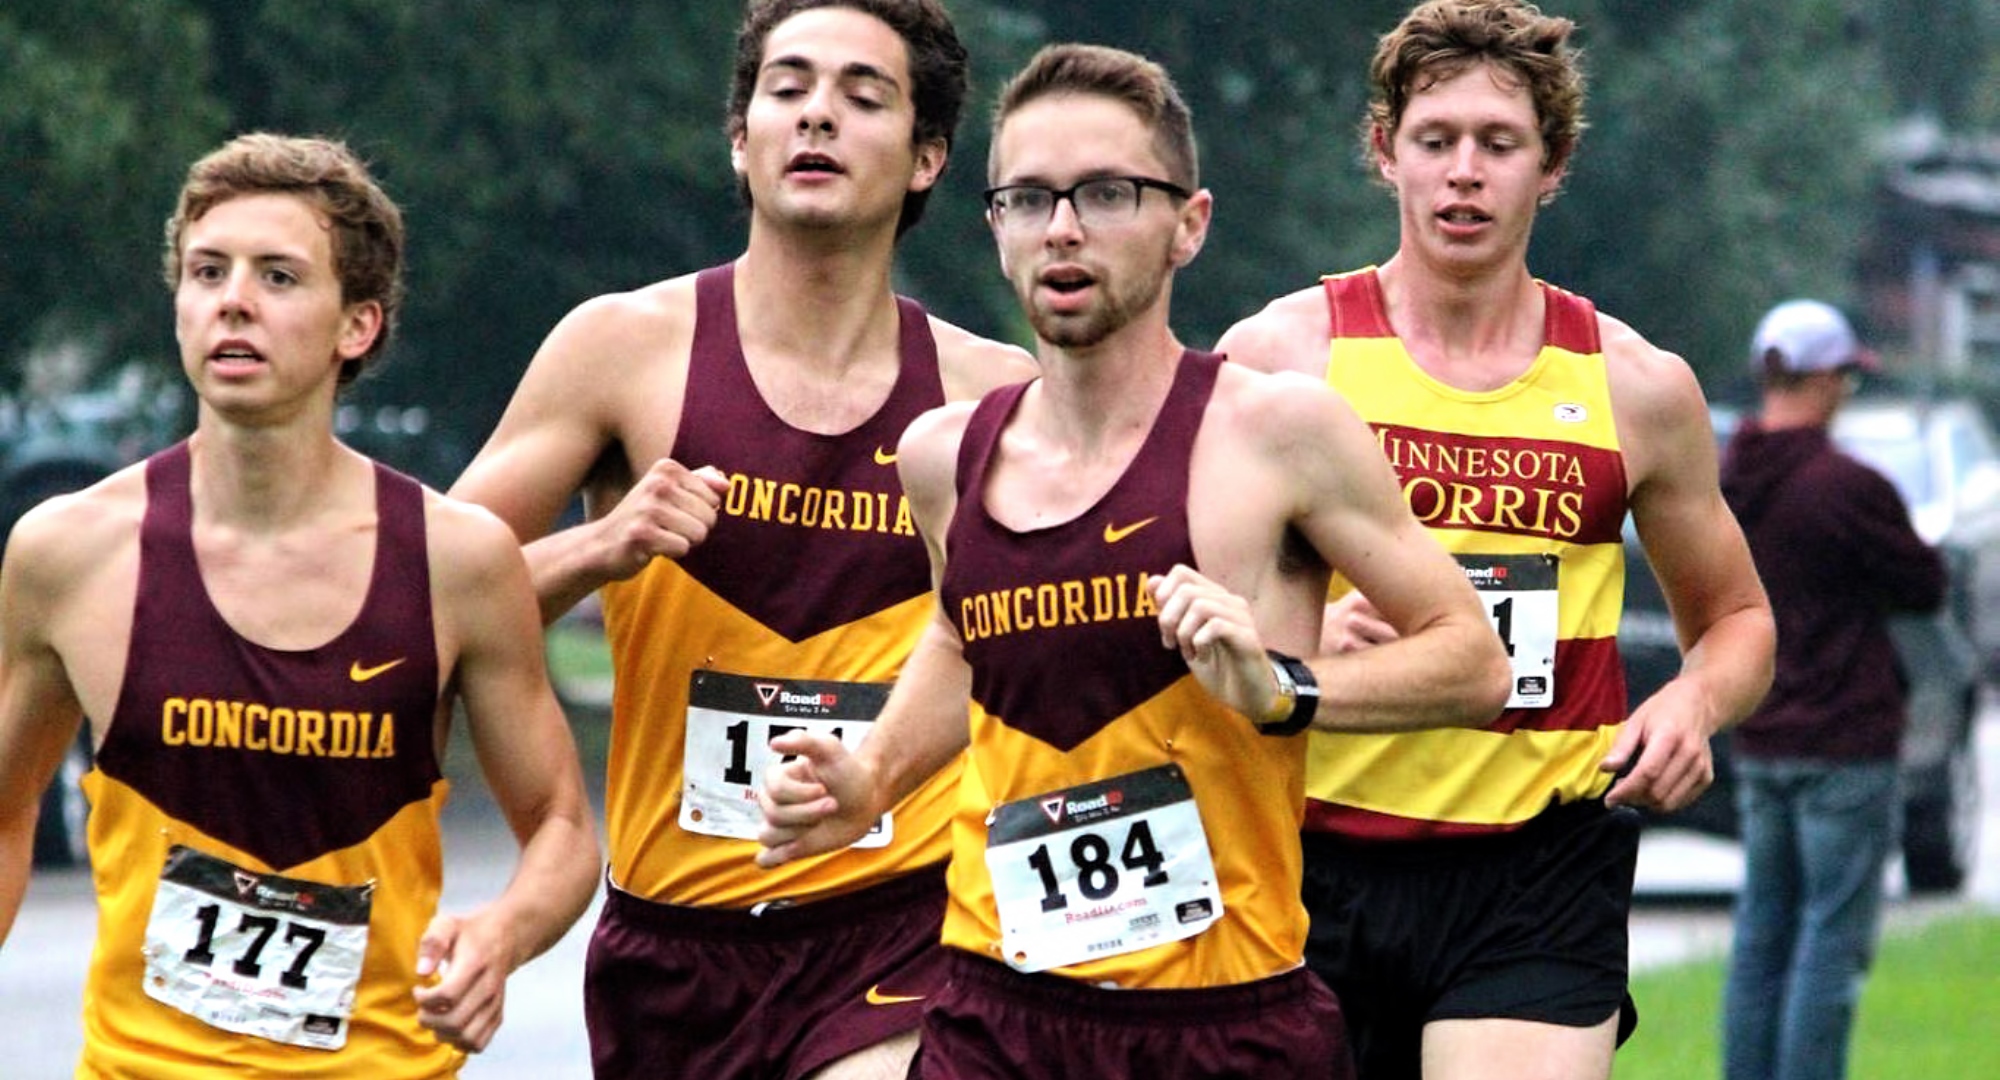 Sophomore Eric Wicklund (#184) leads a pack of four runners en route to winning the season-opening Cobber Invite. (Photo courtesy of Melony Wicklund)